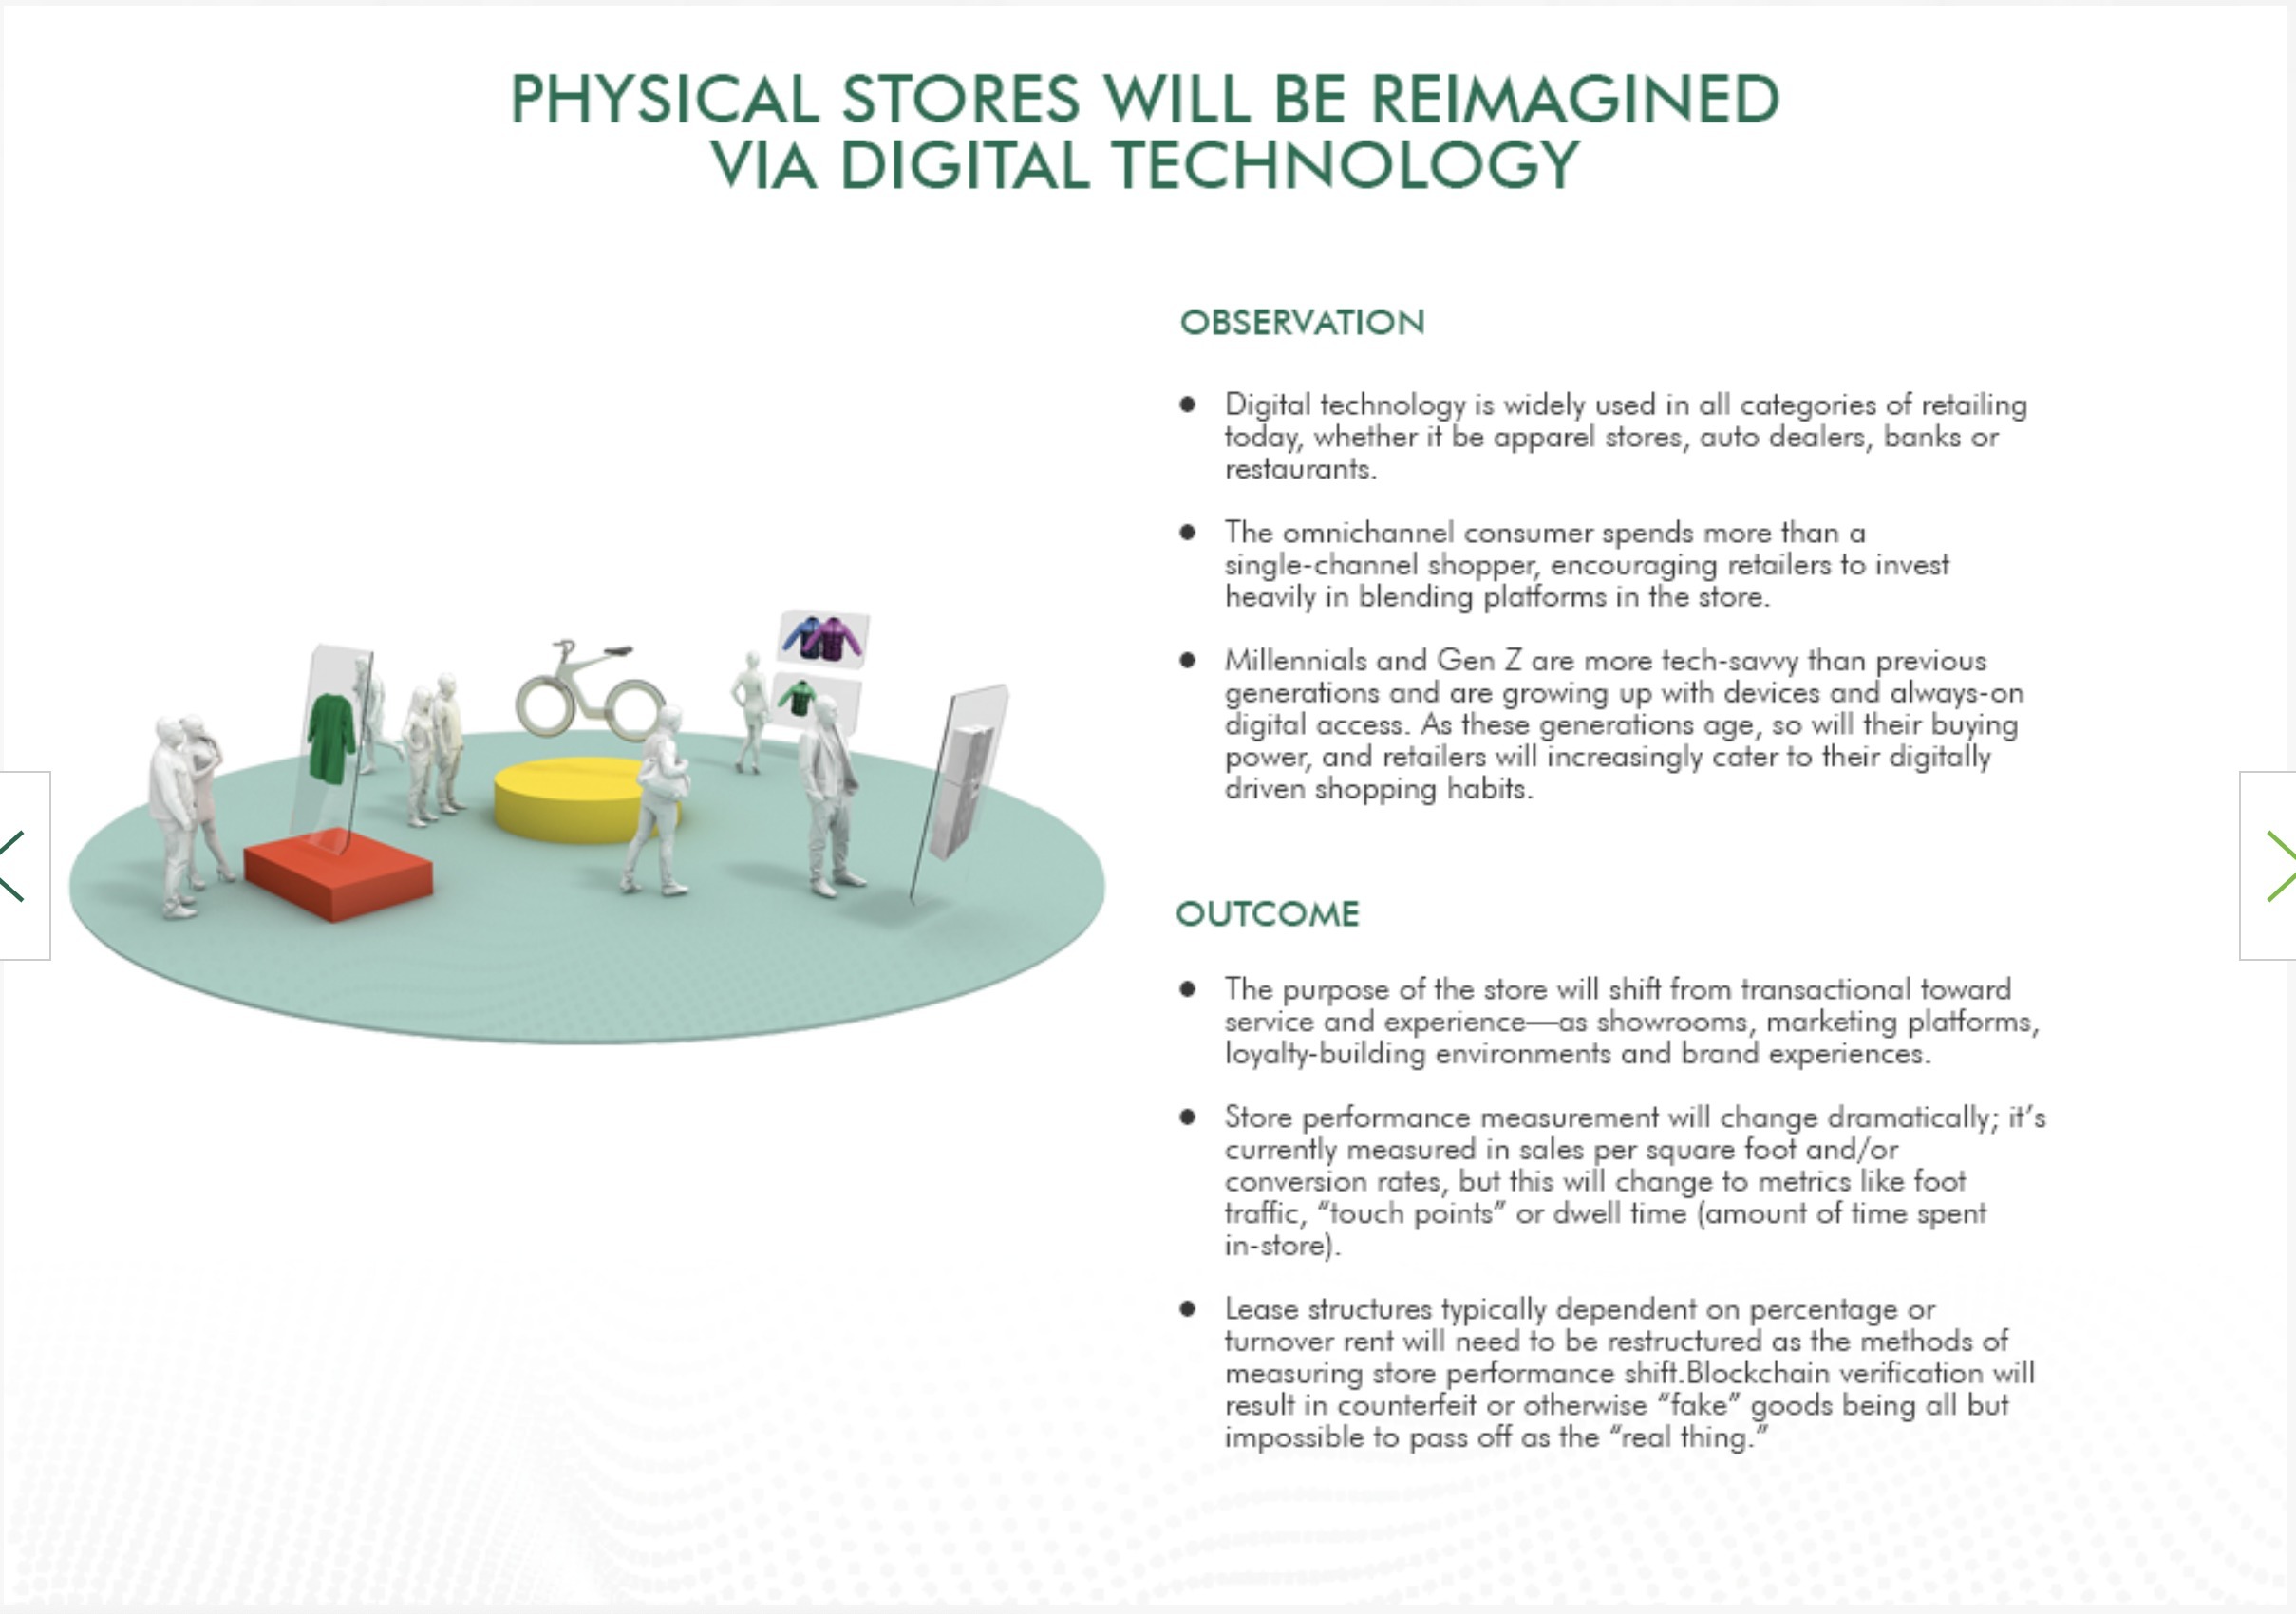 Retail 2030 From Cbre Suggests 42 Trends That